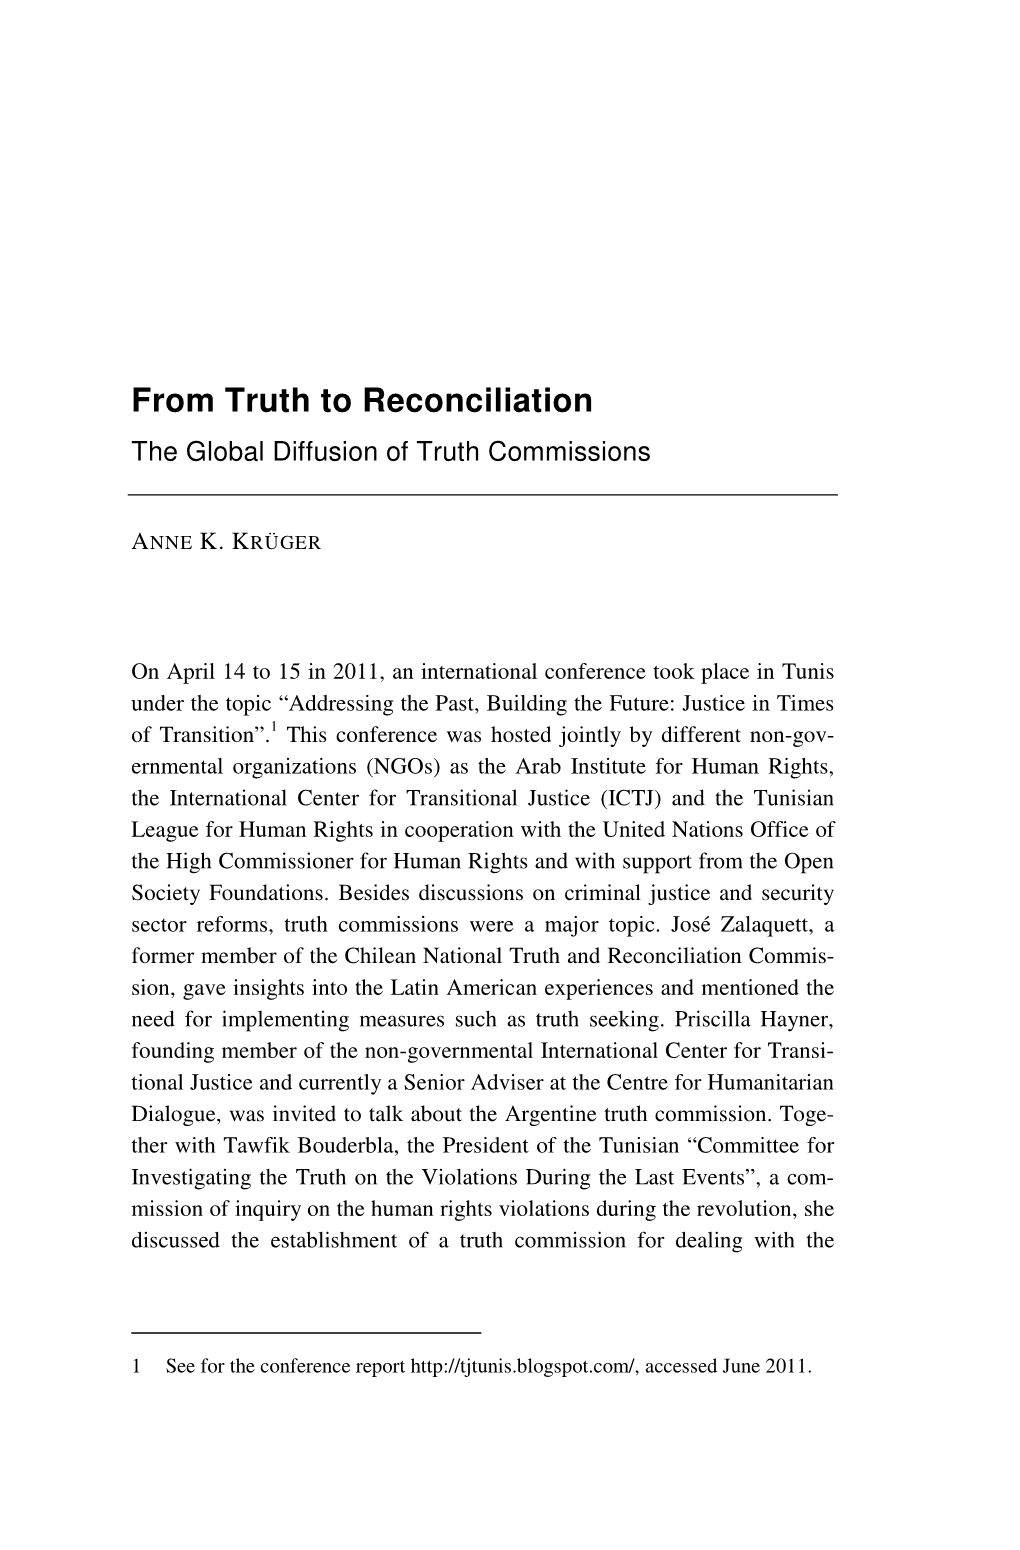 From Truth to Reconciliation the Global Diffusion of Truth Commissions